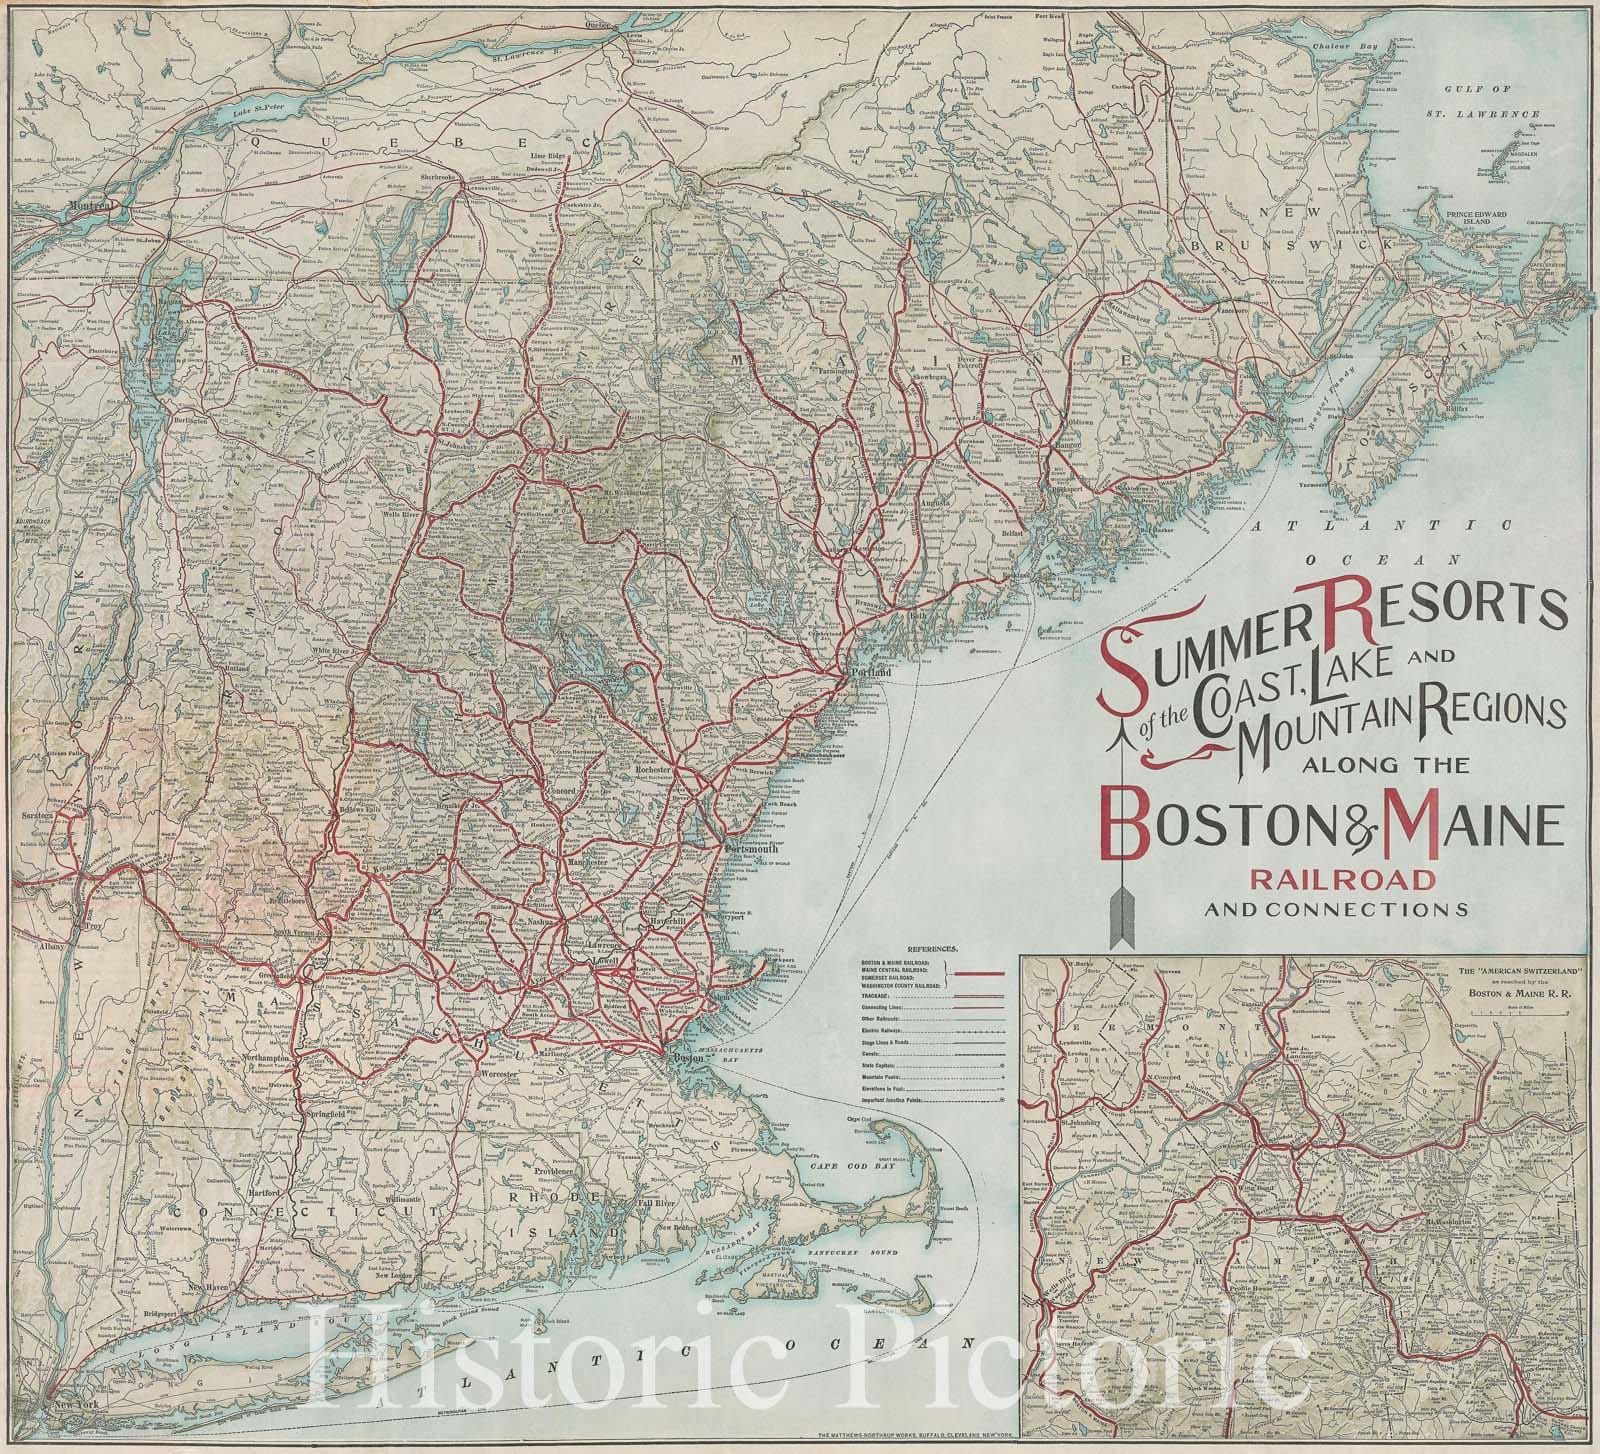 Historic Map : Summer Resorts of the Coast, Lake and Mountain Regions along the Boston and Maine Railroad and Connections, Vintage Wall Art